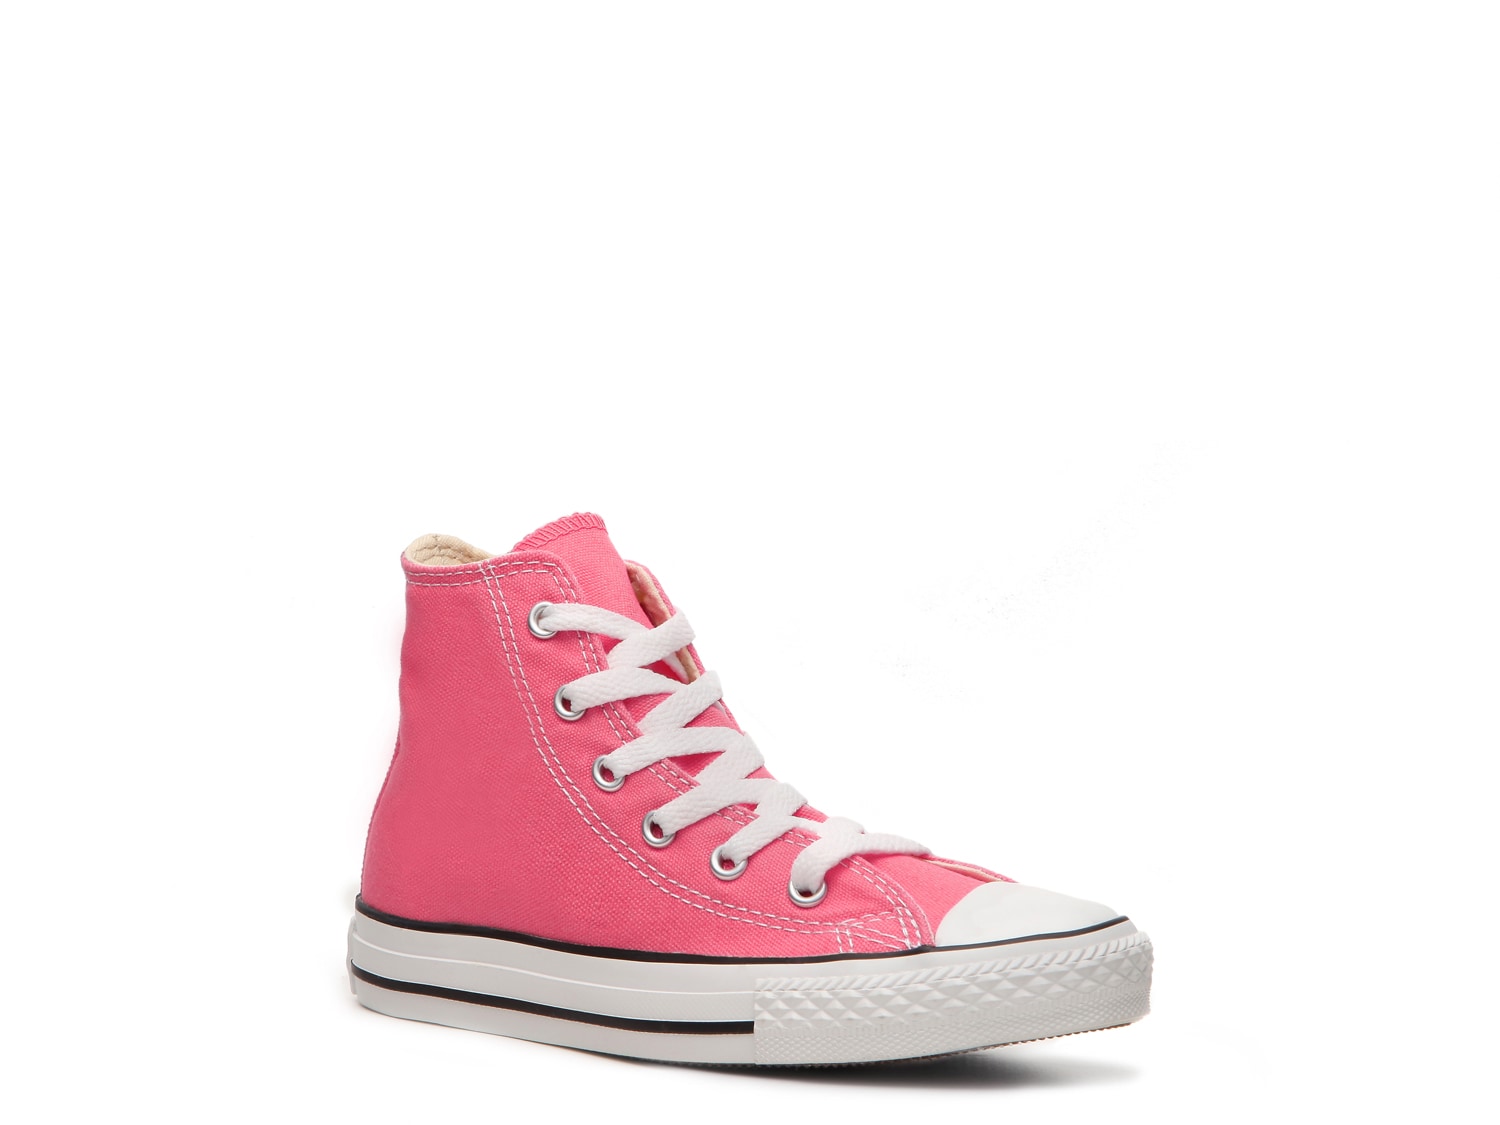 Converse Chuck Taylor All Star High-Top Sneaker - Kids' - Free Shipping ...